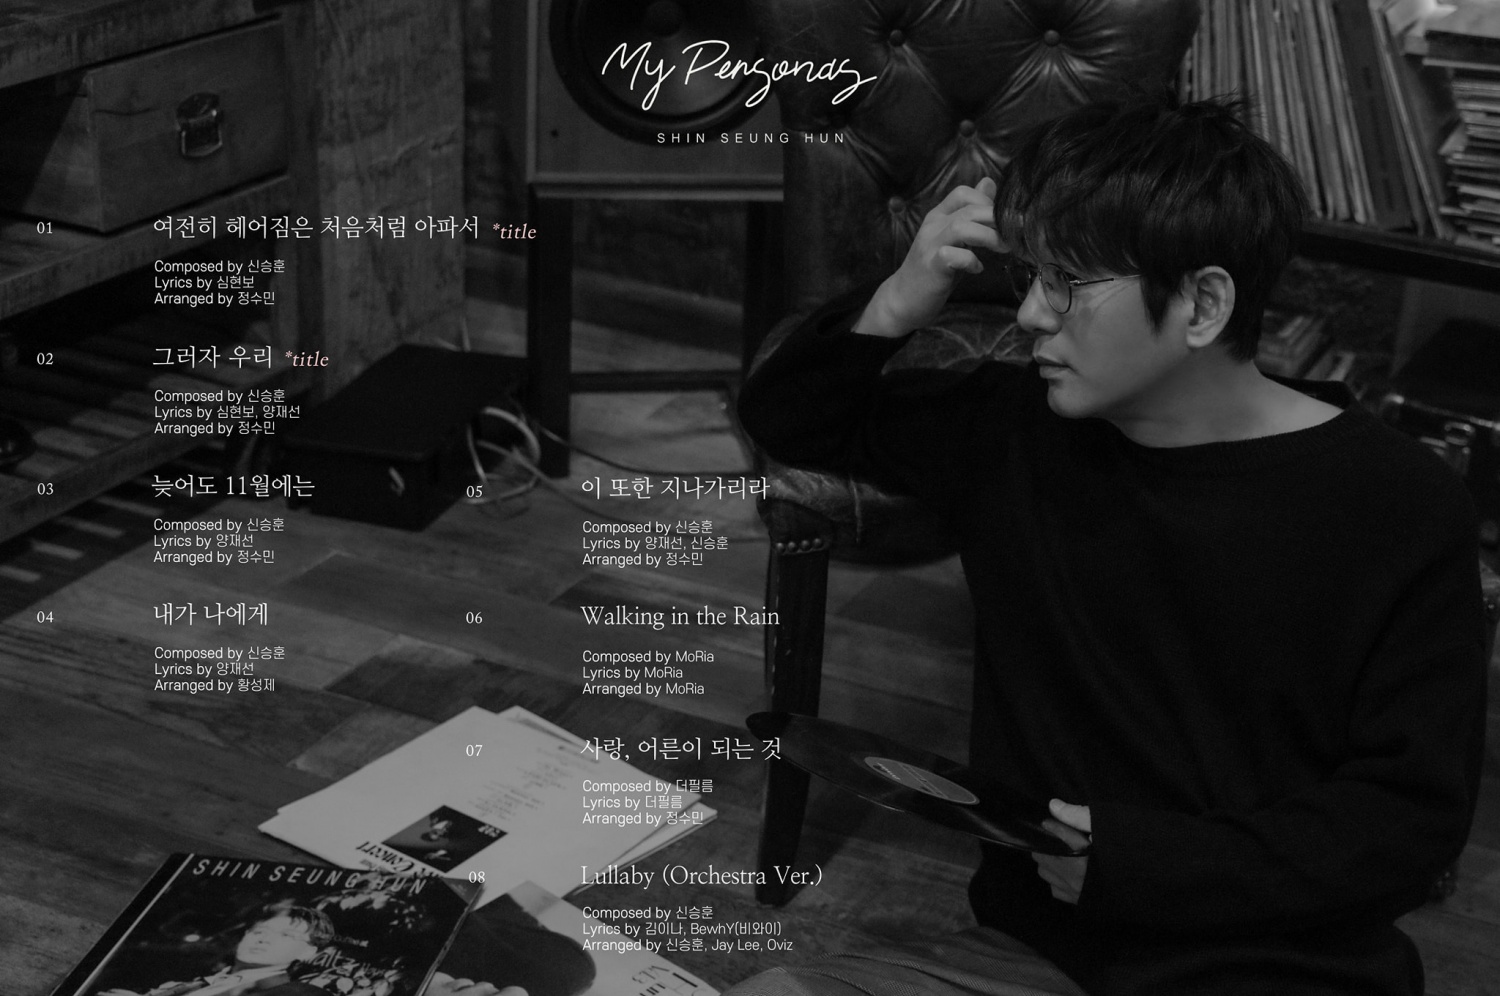 Shin Seung Hun Releases the Tracklist of his 30th-anniversary Special Album “My Personas”